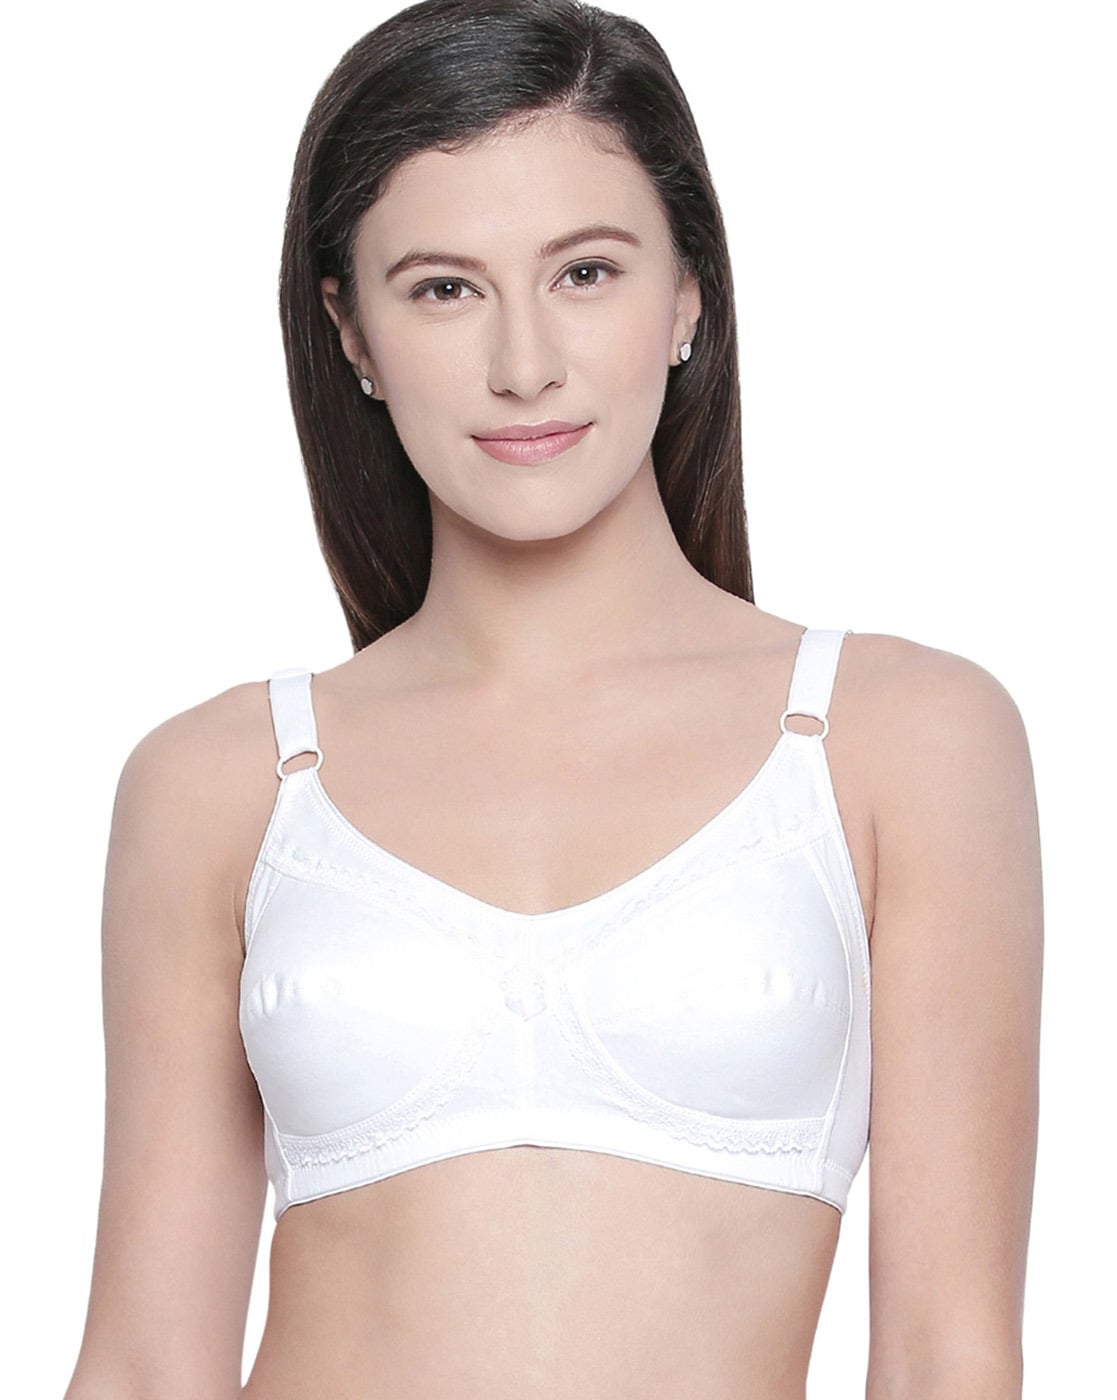 Super Soft Moulded Cup Seamless Bra's - Bodycare Creations